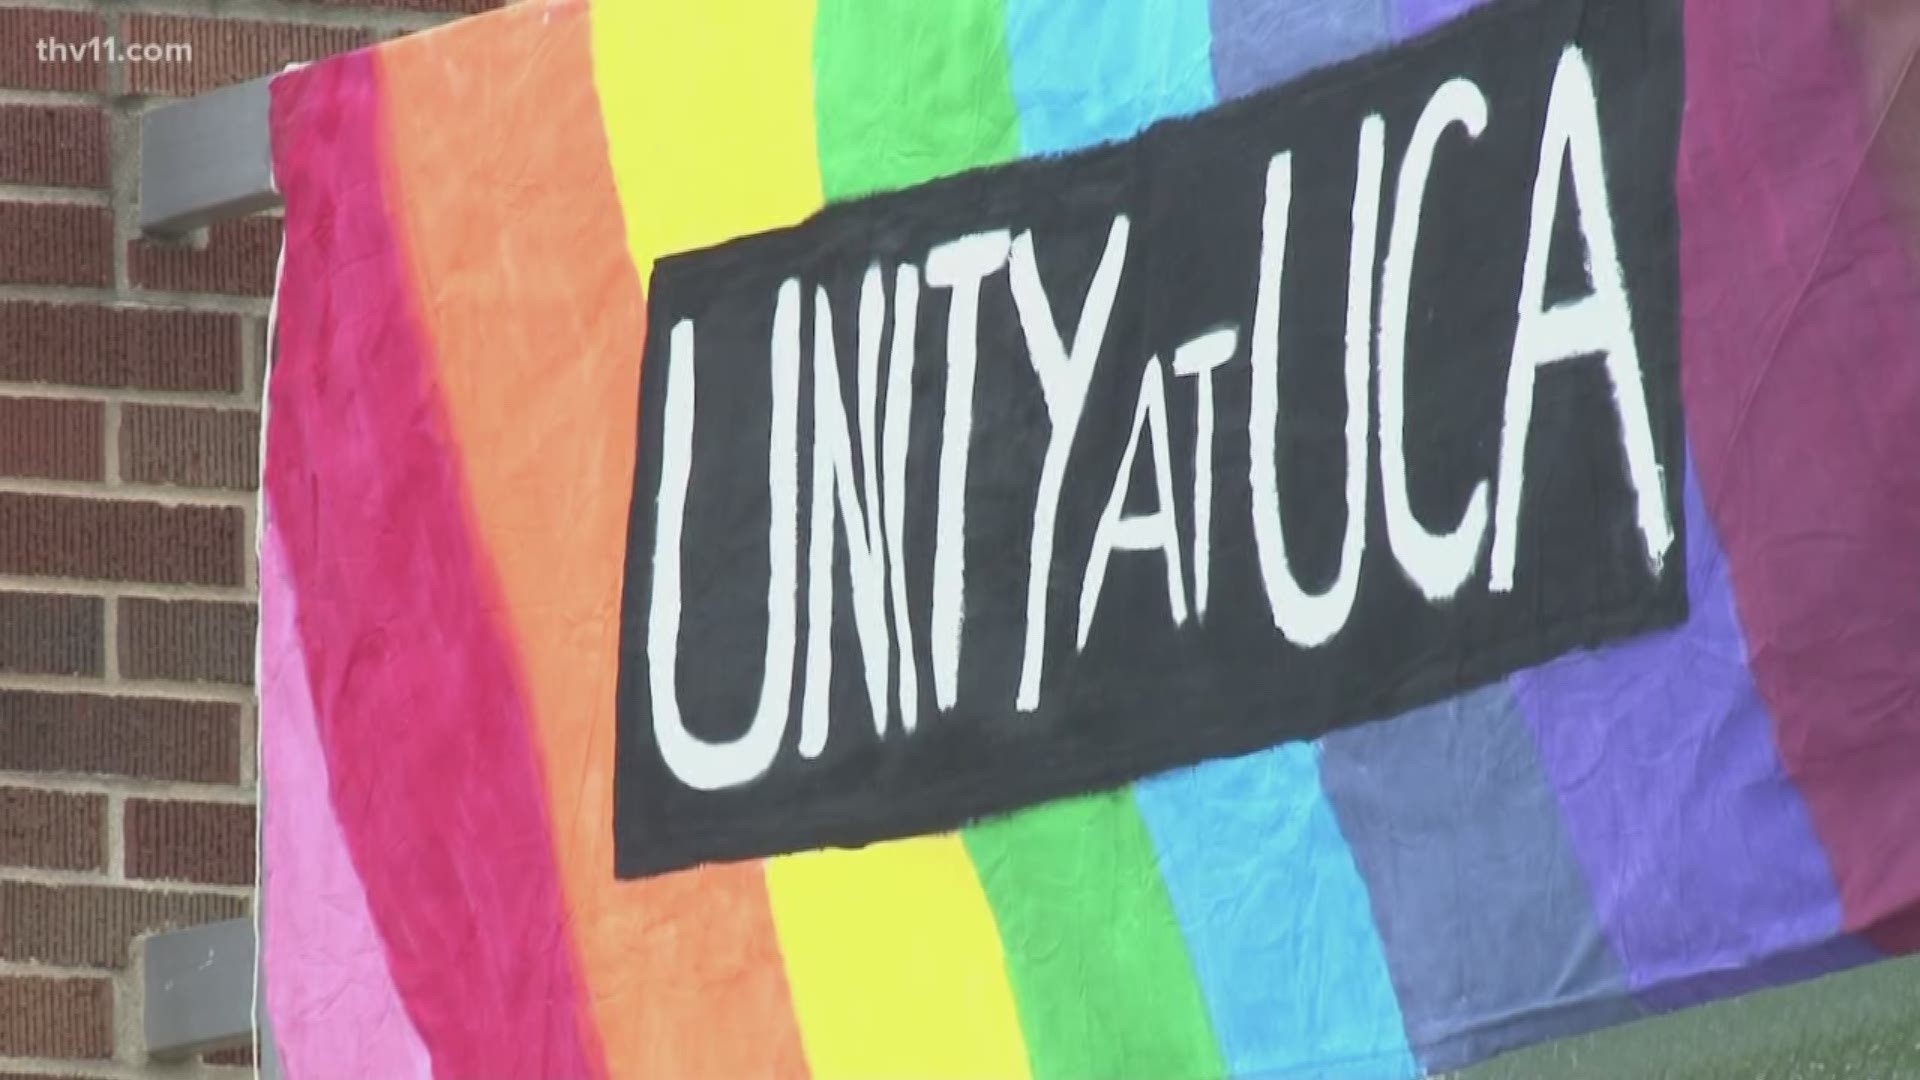 A group gathered on the UCA campus for a public conversation in support of the LGBTQ community.